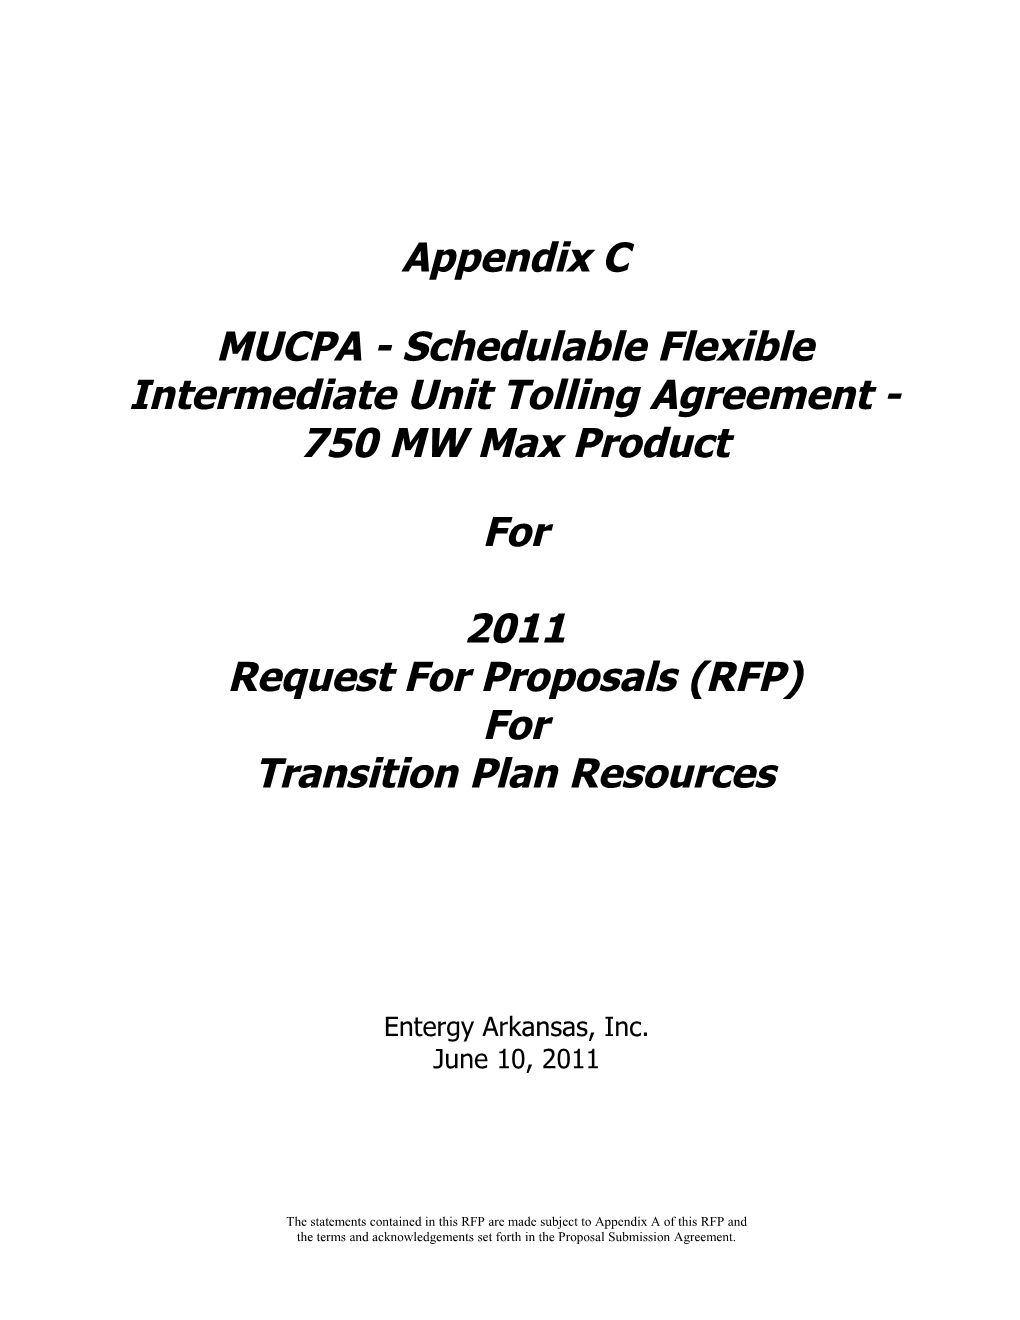 MUCPA - Schedulable Flexible Intermediate Unit Tolling Agreement - 750 MW Max Product